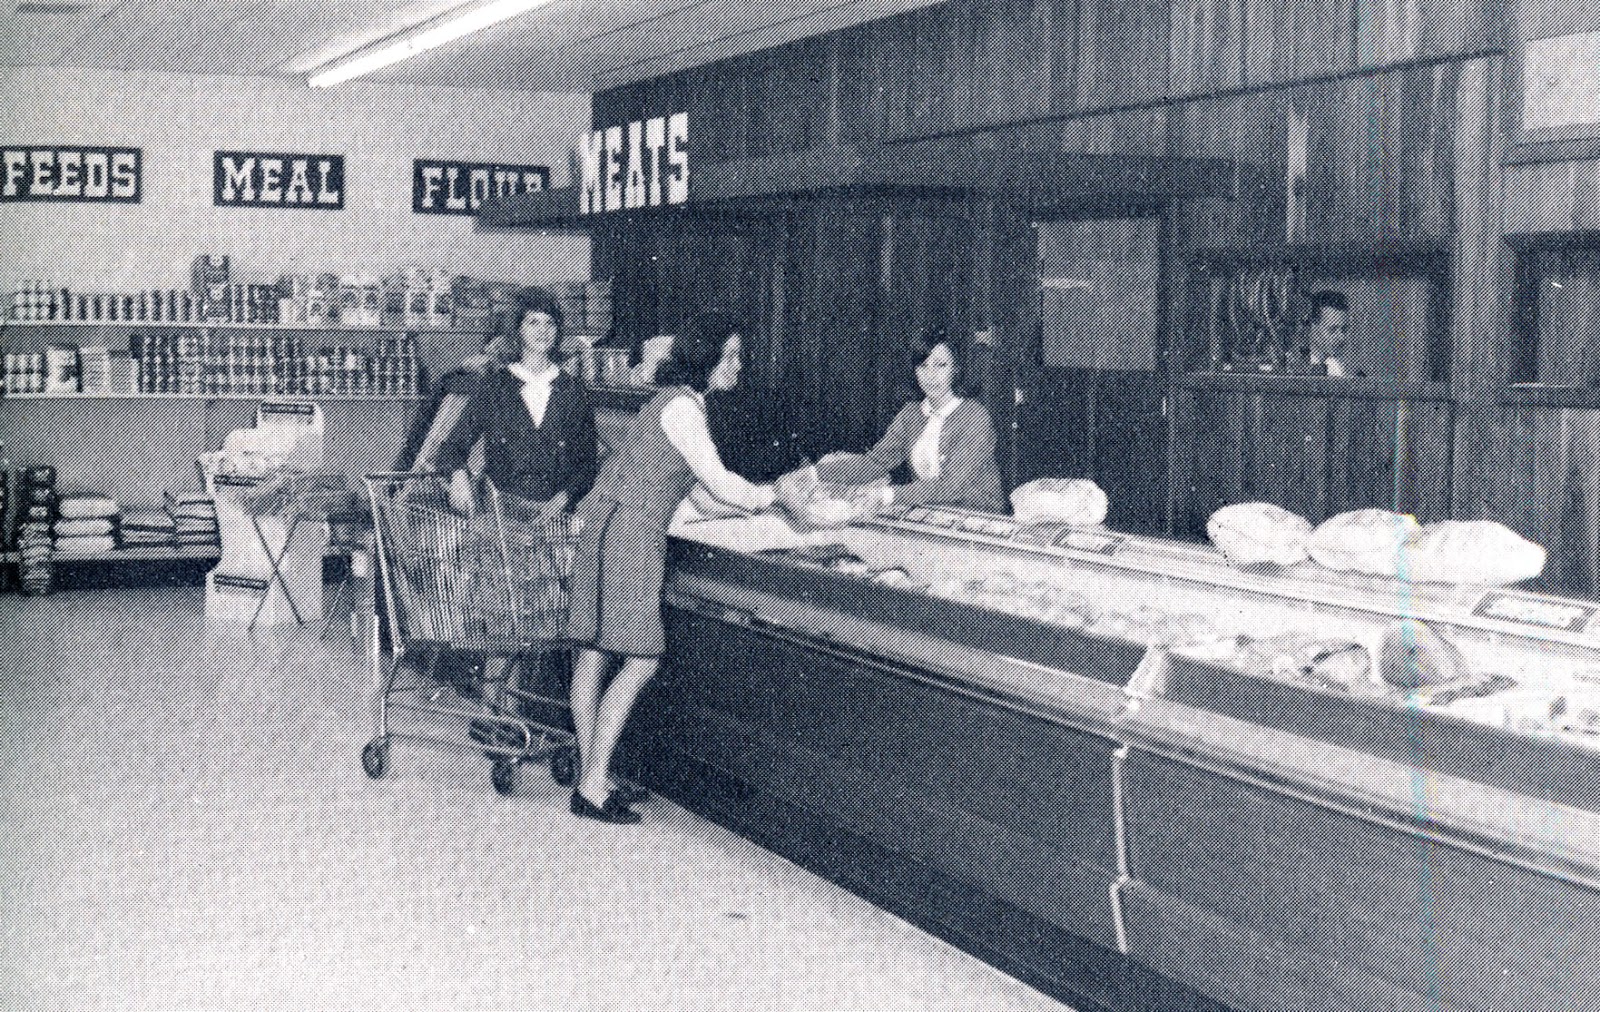 CULLENS GROCERY - CENTRAL DRIVE, EAST DUBLIN, GA 1966